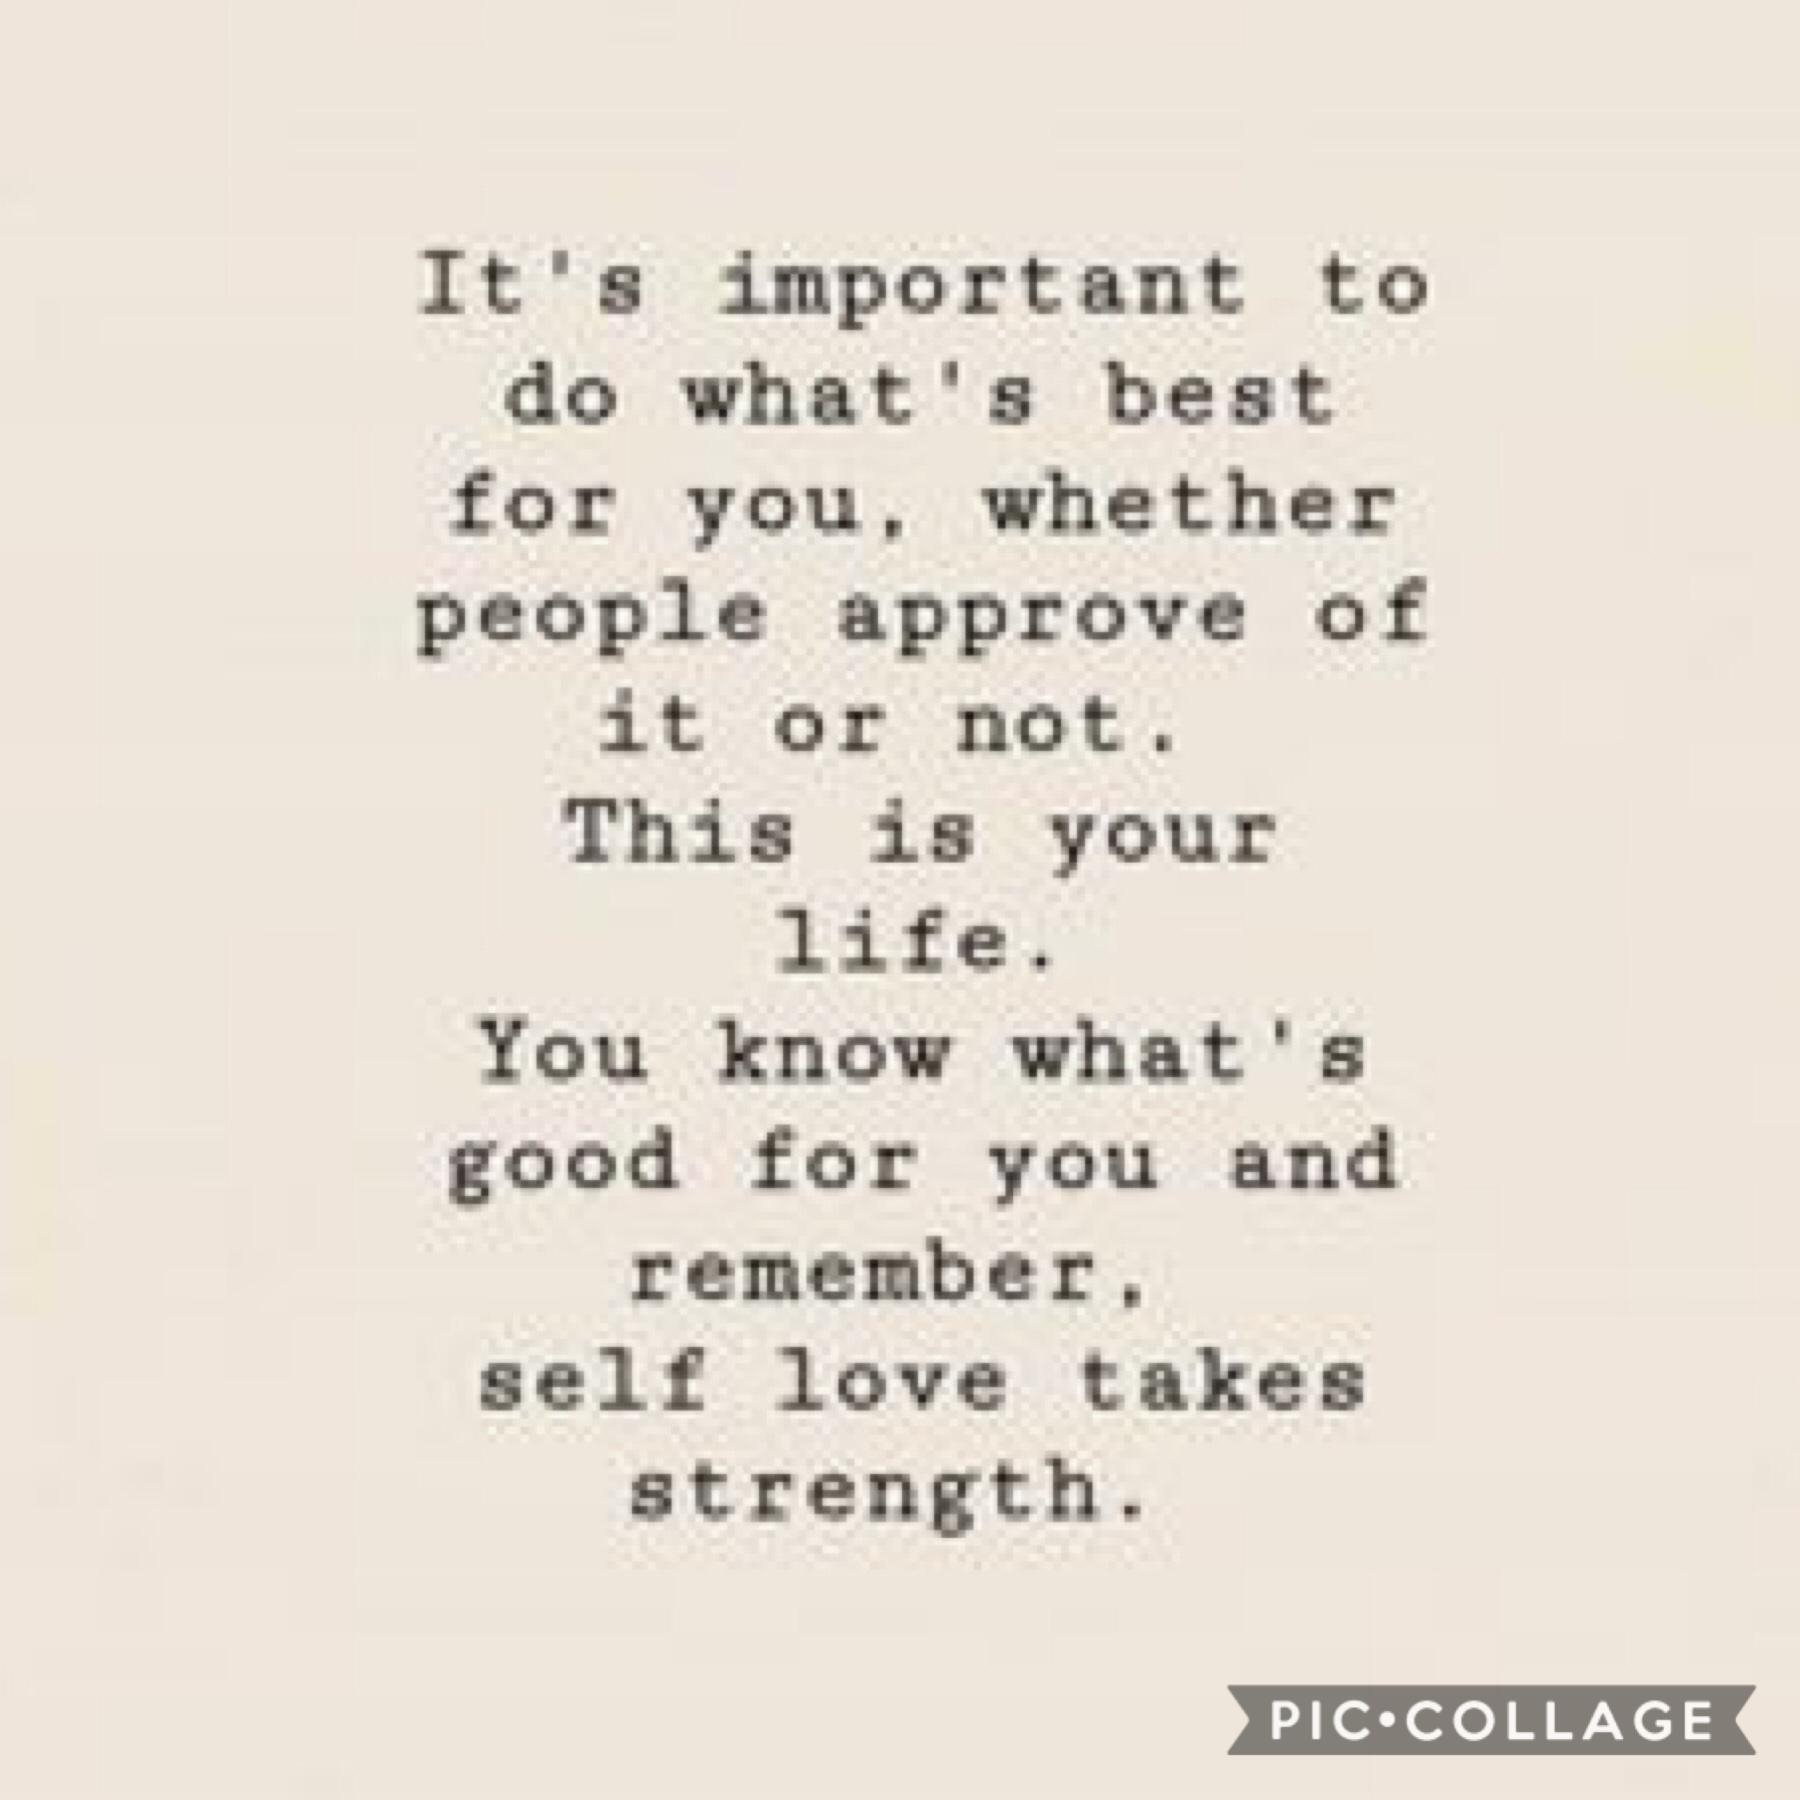 relating to this a good amount today💓do what makes YOU happy. you are not put on this earth to make other’s lives easier. use your life to your advantage and LOVE YOURSELF, flaws and all💓